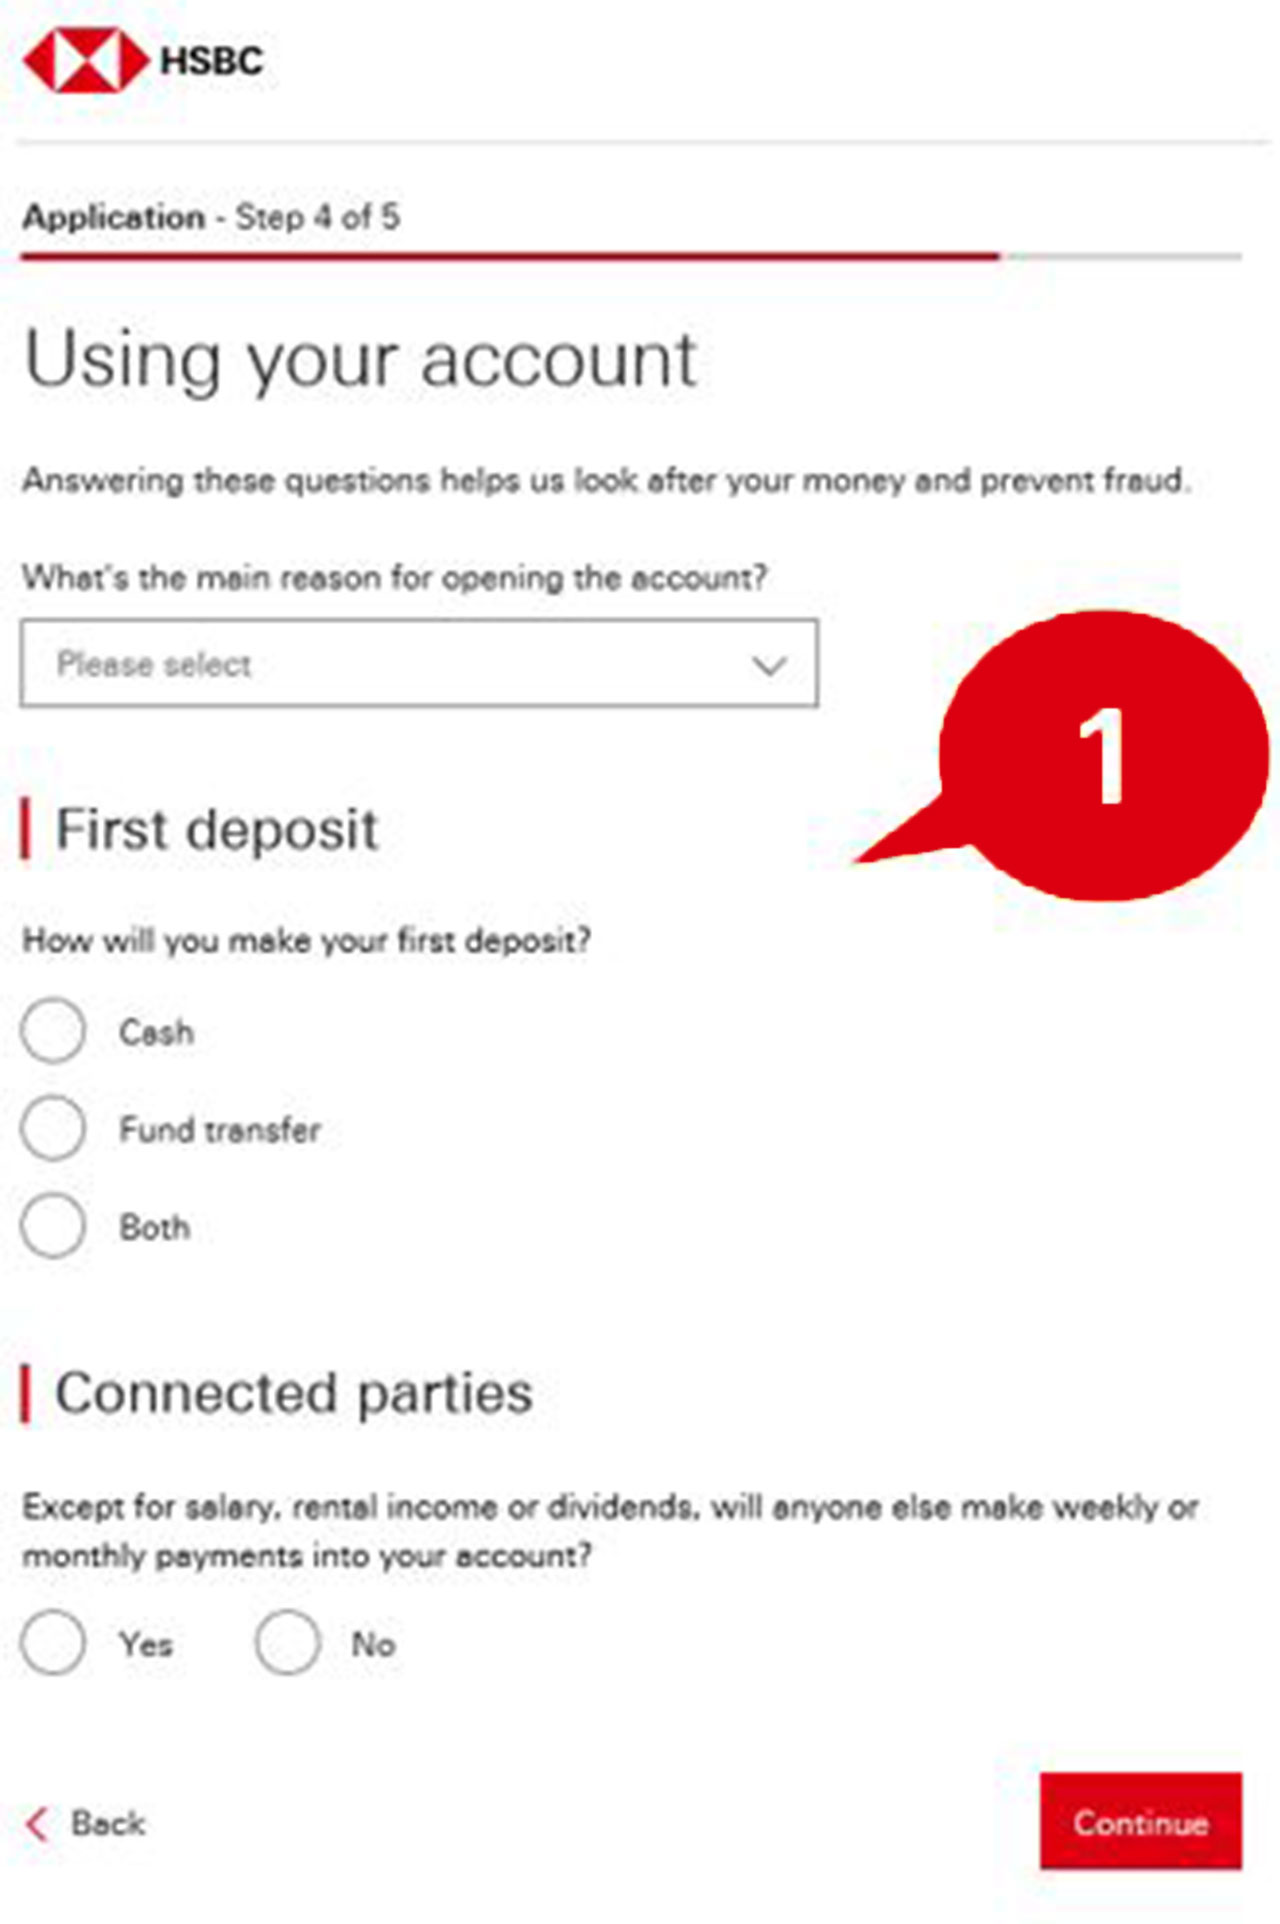 Step 4 of online application form, using your account